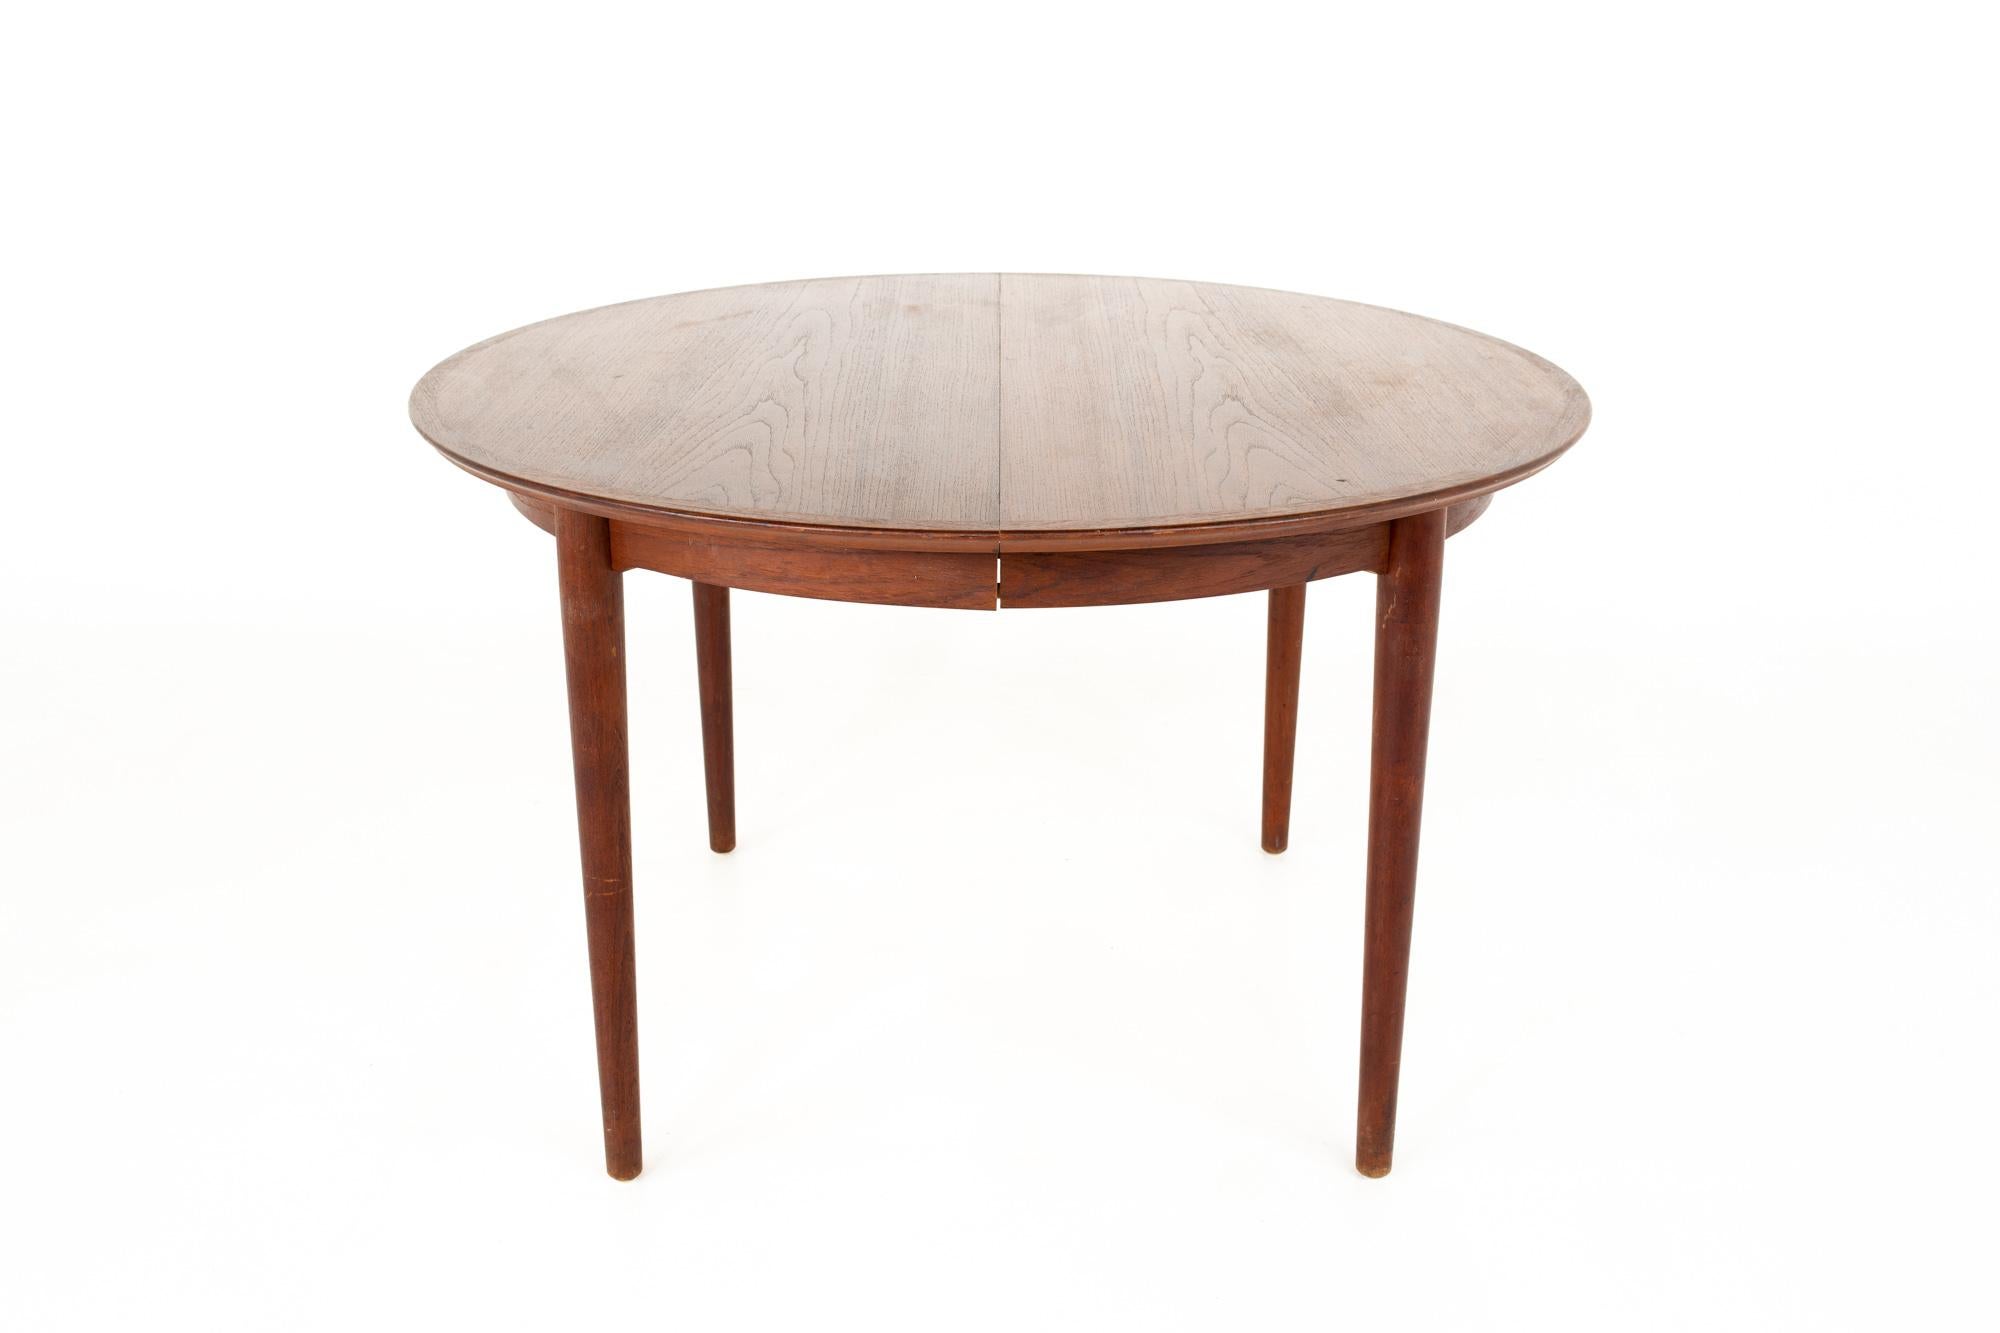 Arne Vodder Mid Century teak dining table

Table measures: 47.25 wide x 47.25 deep x 26 high 
Leaf measures: 19.75 inches wide 

This piece is available in what we call restored vintage condition. Upon purchase it is fixed so it’s free of